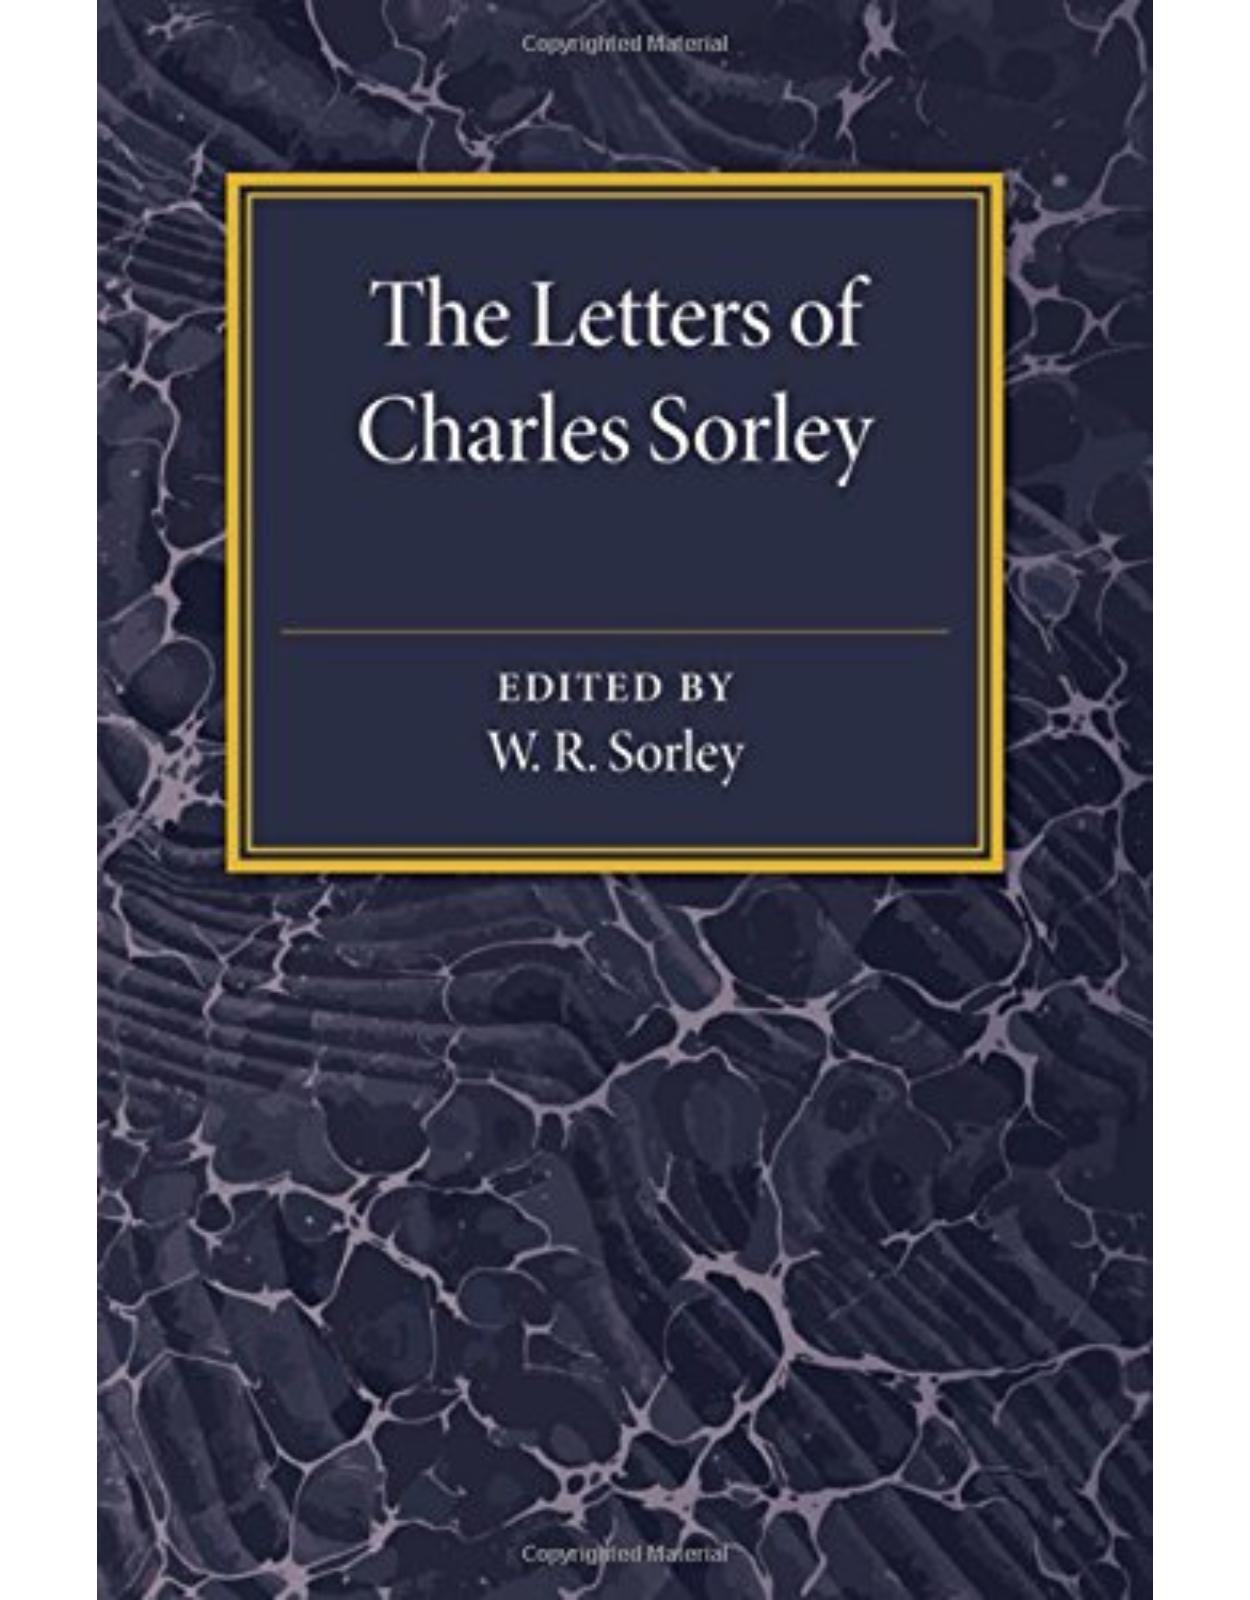 The Letters of Charles Sorley